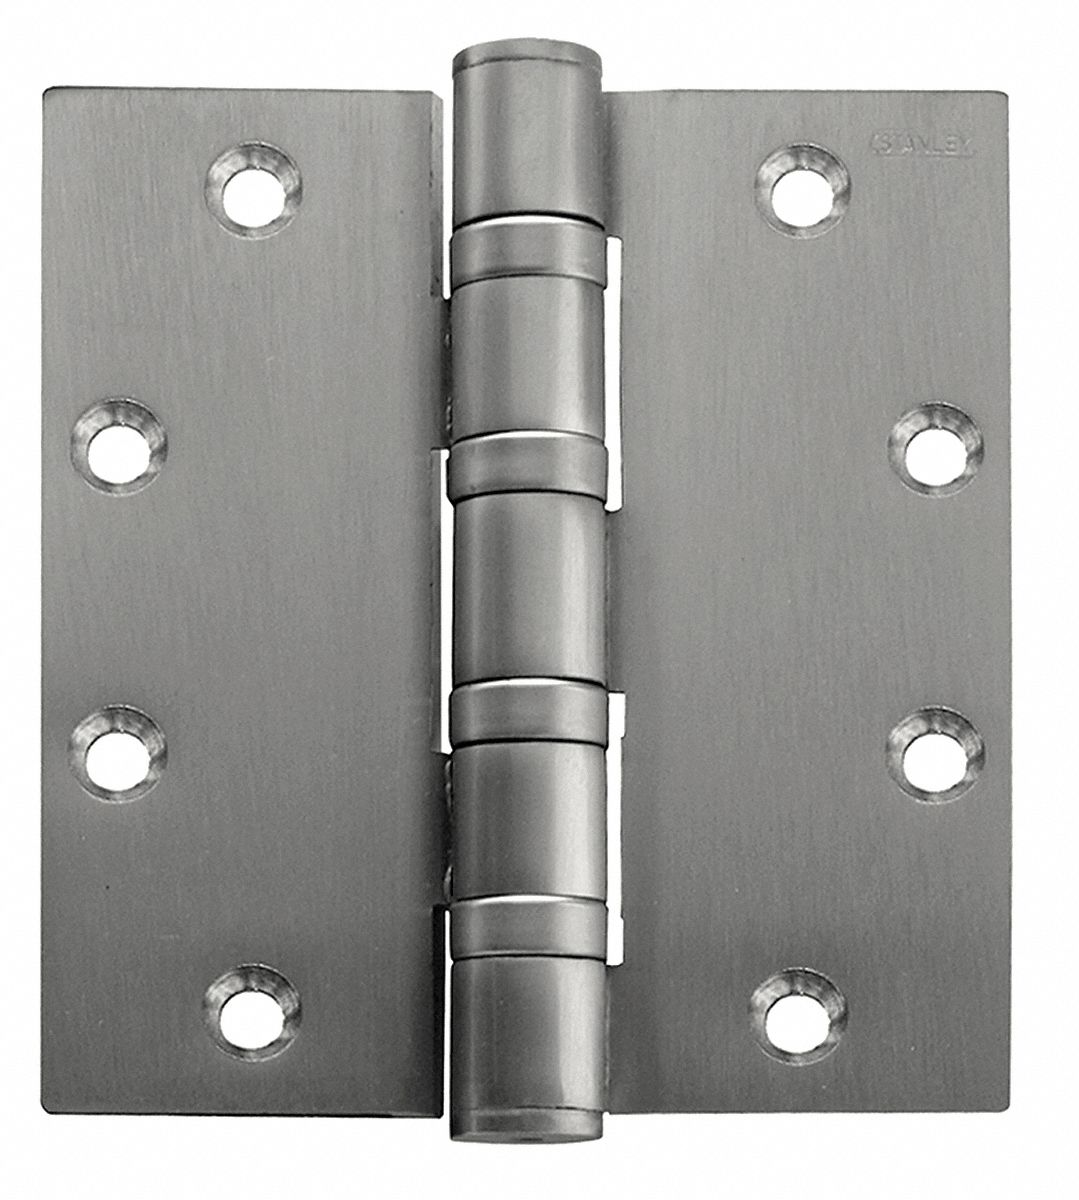 Stanley 4 1 2 In X 2 In Butt Hinge With Satin Stainless Steel Finish Full Mortise Mounting